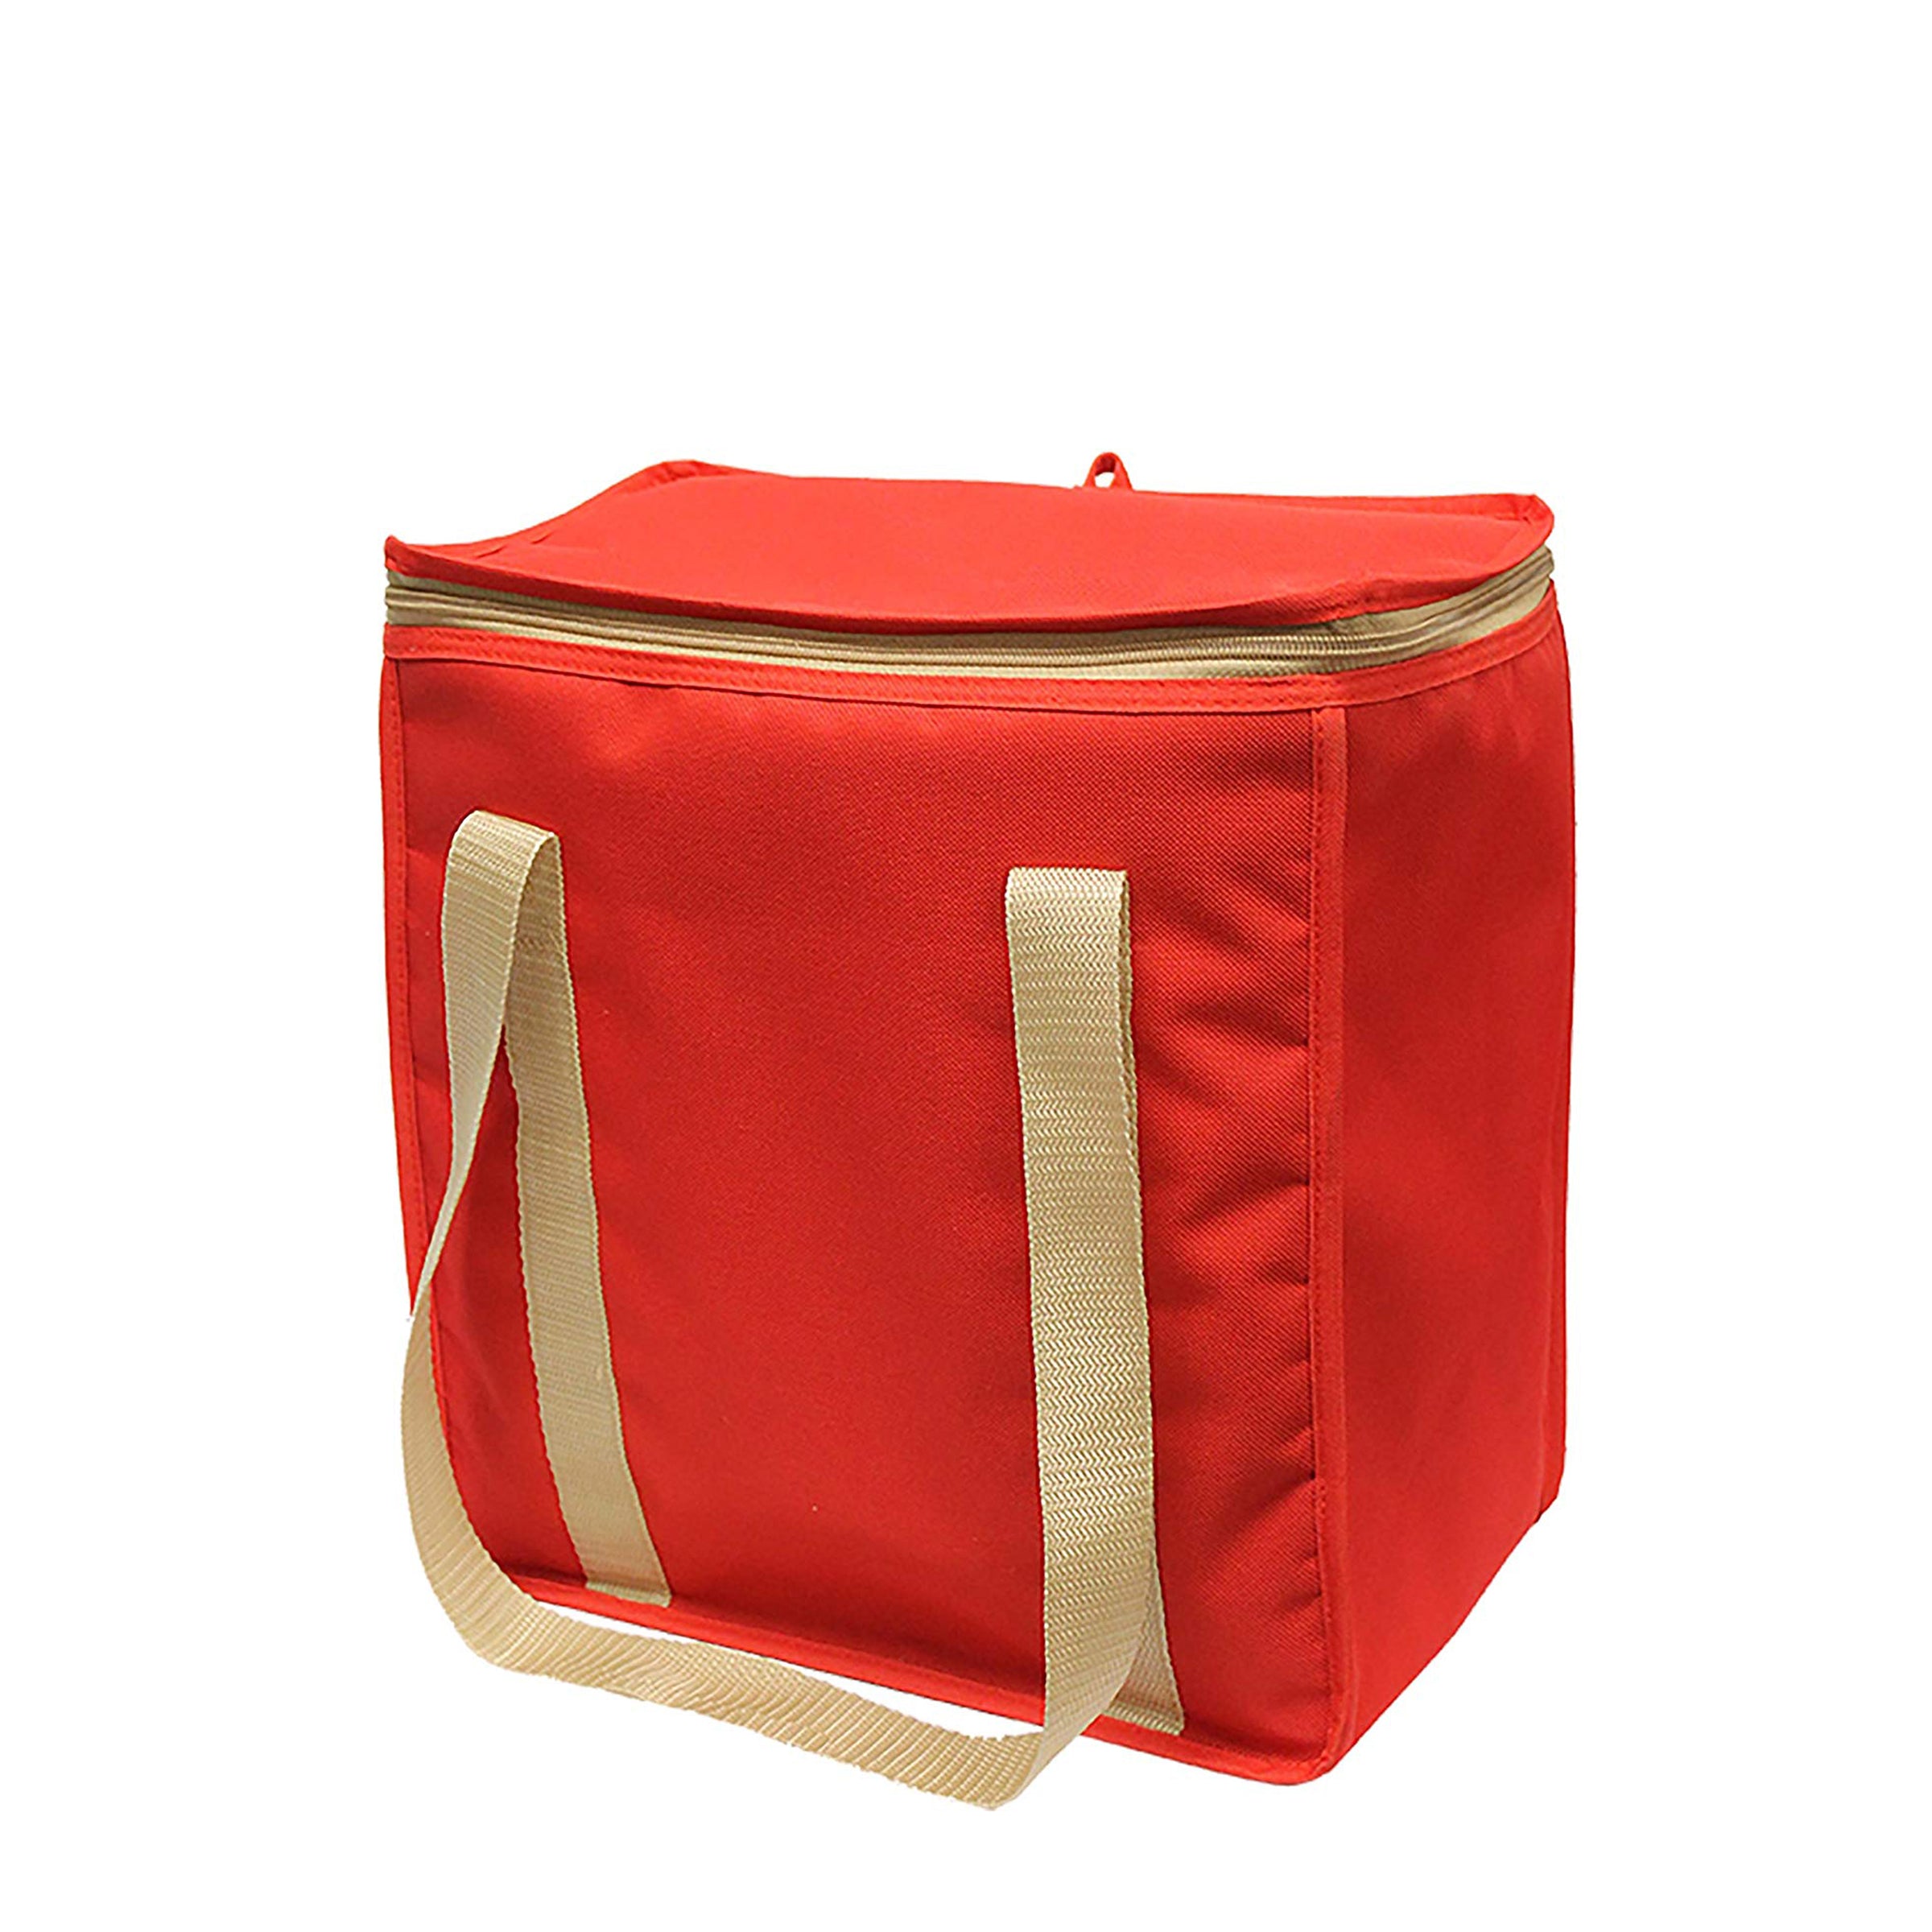 White Insulated Large Cooler Bags at Best Price in New Delhi  Khanna  Exporters